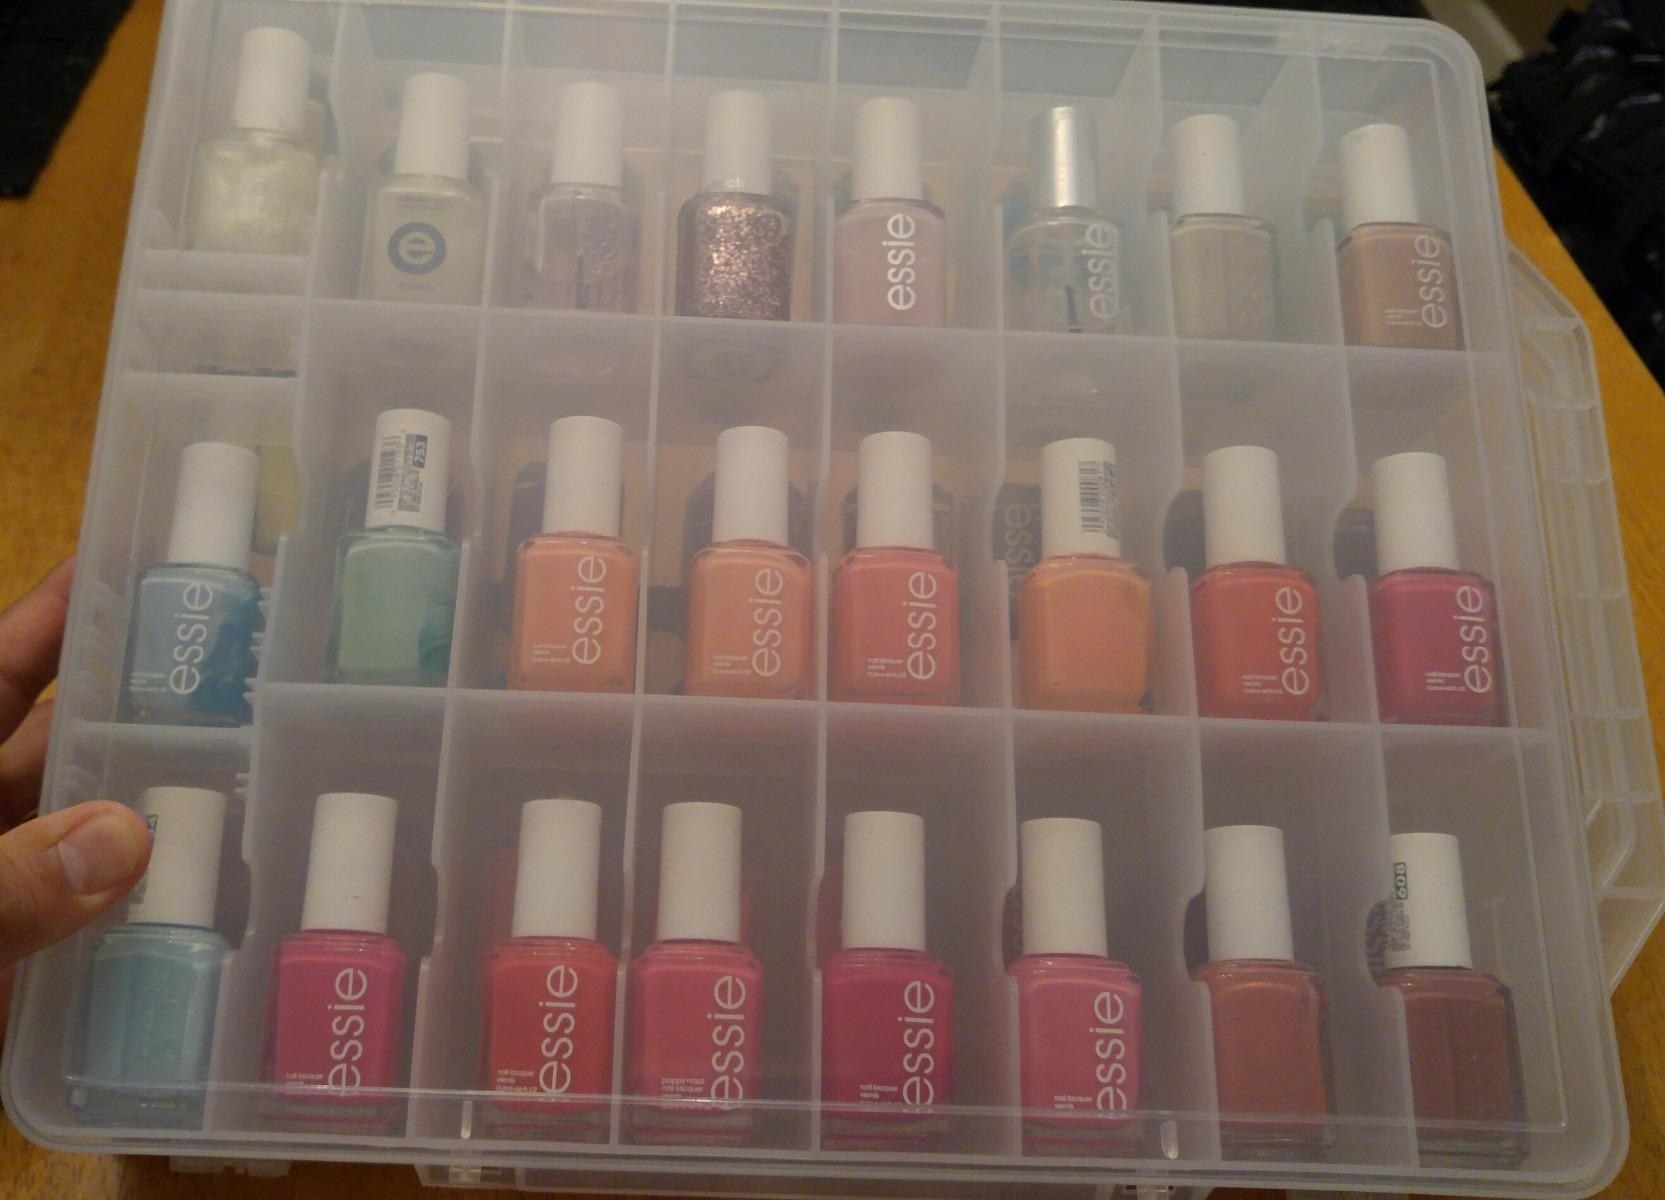 The clear plastic case holding rows of essie nail polish